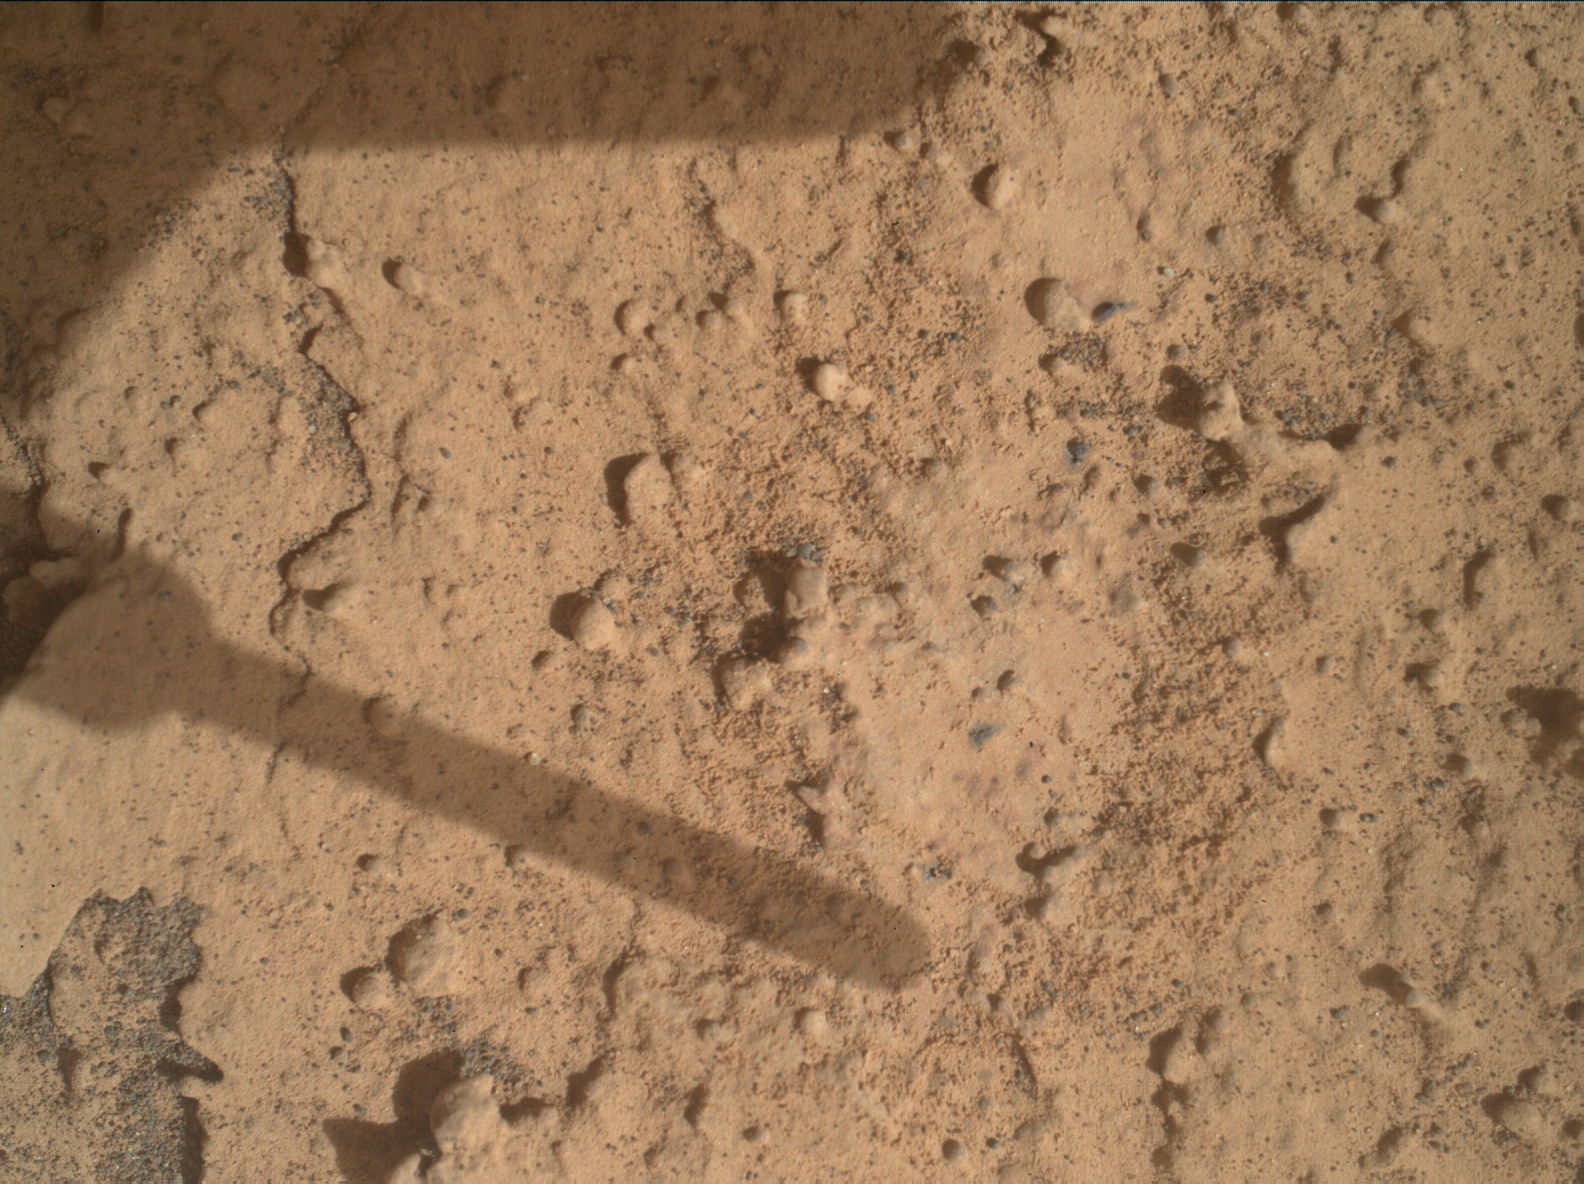 Nasa's Mars rover Curiosity acquired this image using its Mars Hand Lens Imager (MAHLI) on Sol 3537